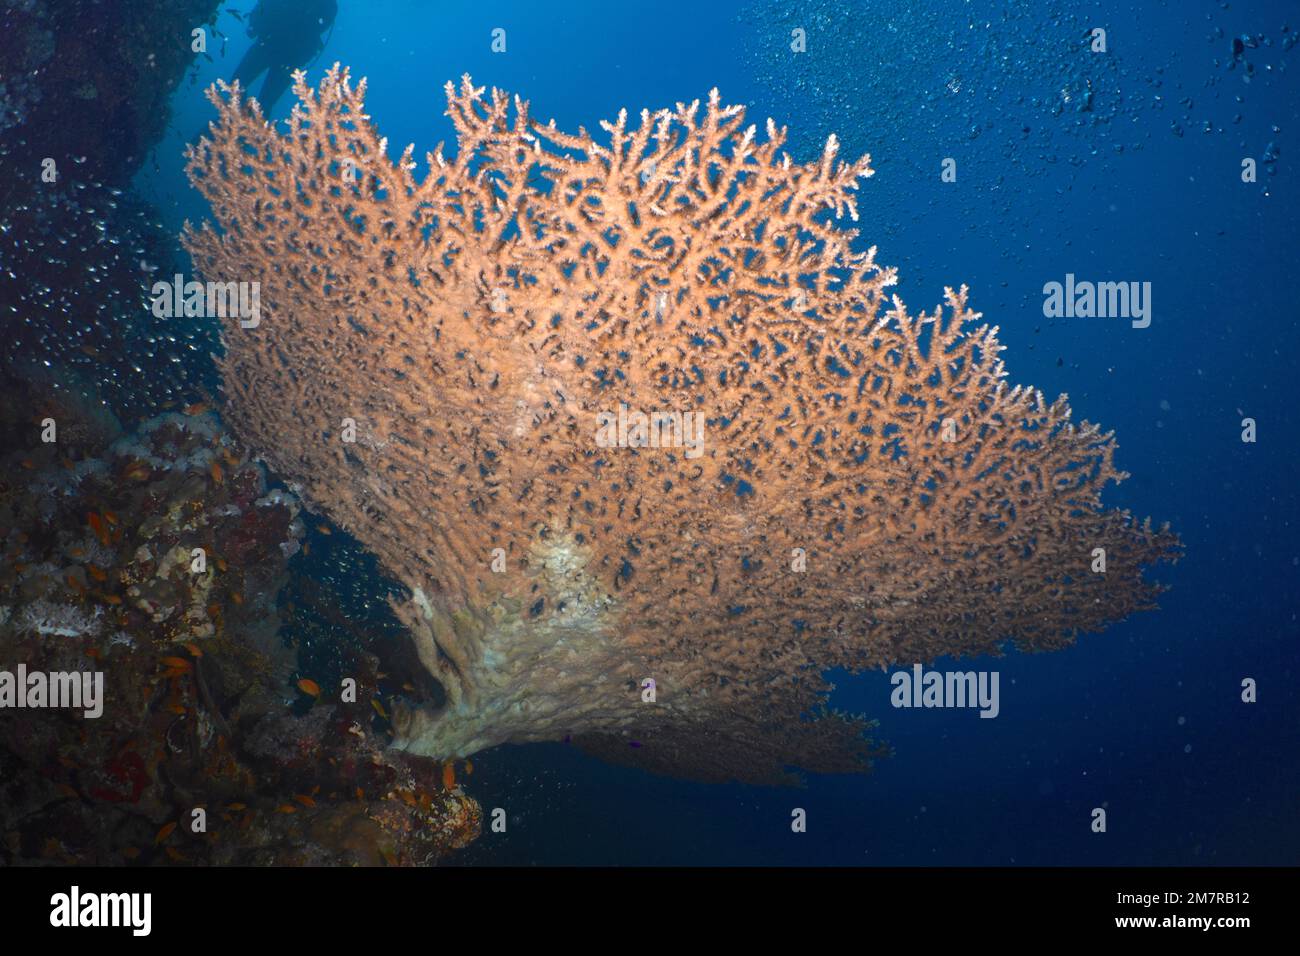 Pharaoh's antler coral (Acropora pharaonis) from below. Dive site Shaab Sharm, Egypt, Red Sea Stock Photo